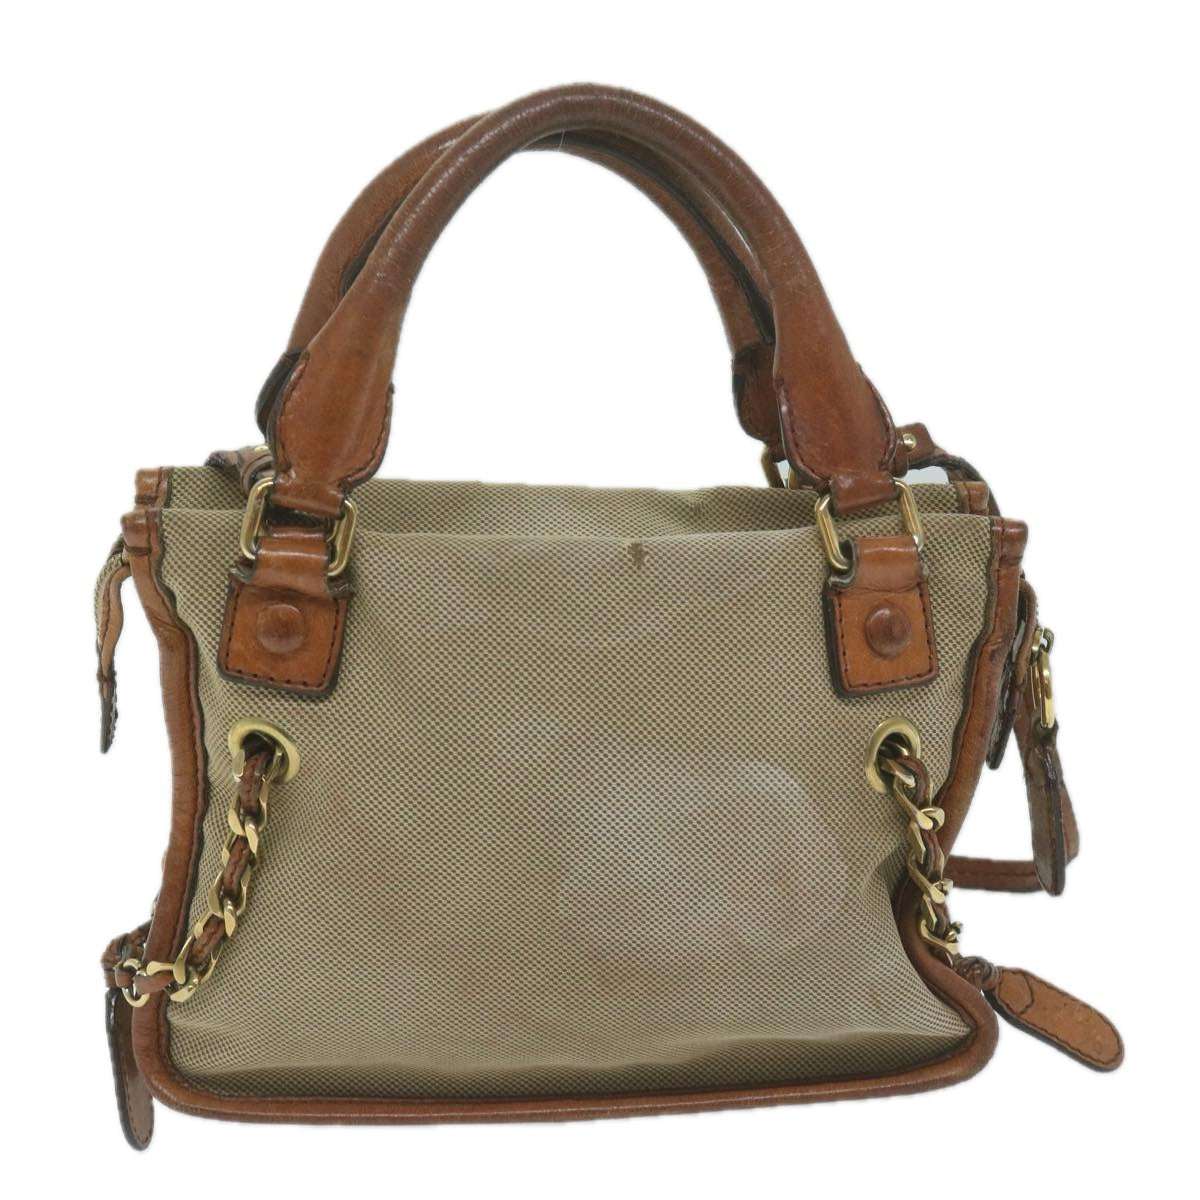 Chloe Harley Hand Bag Canvas Leather 2way Beige Auth bs11776 - 0